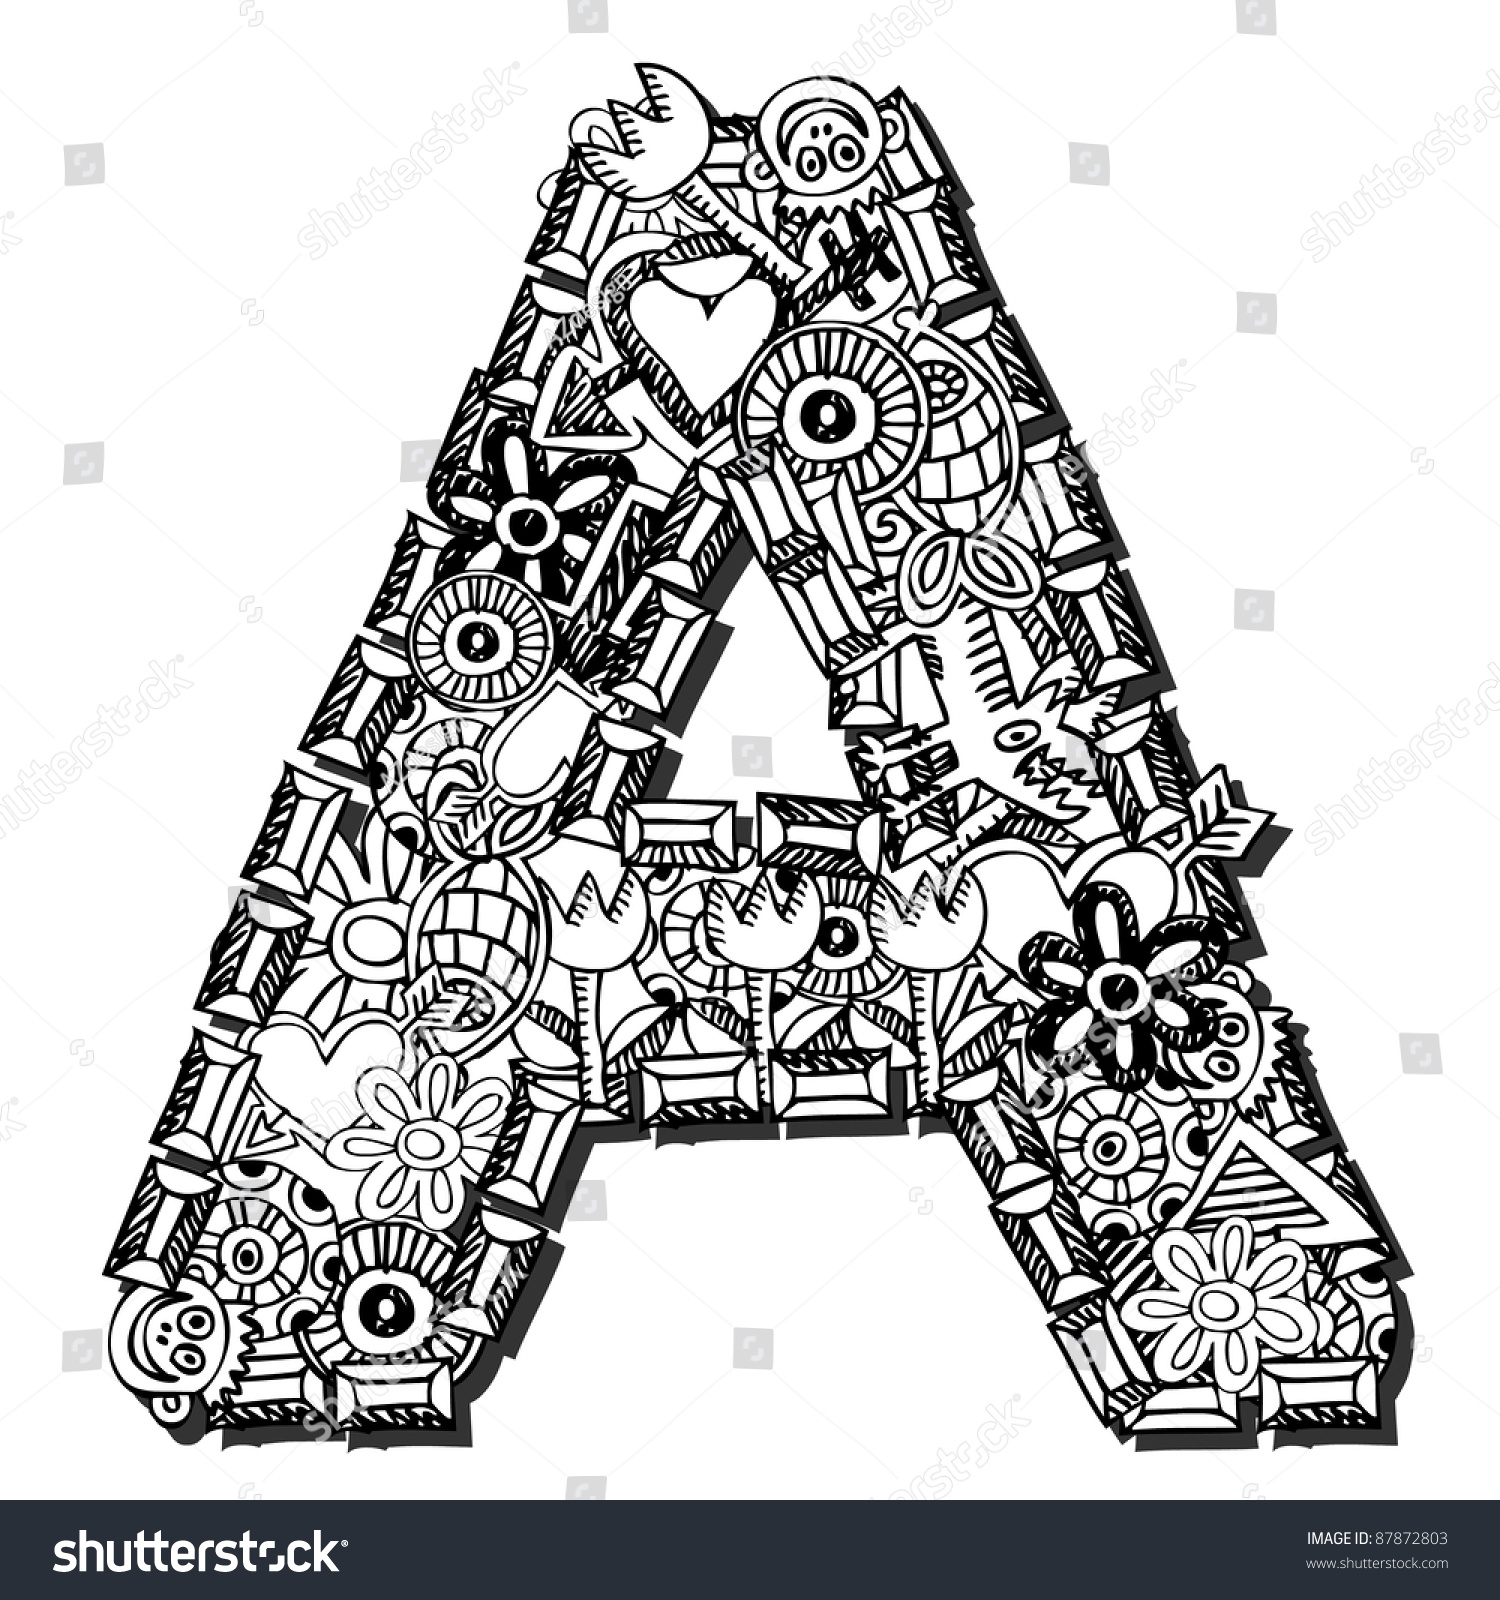 Royalty Free Childlike Doodle ABC Crazy Letter A 87872803 Stock